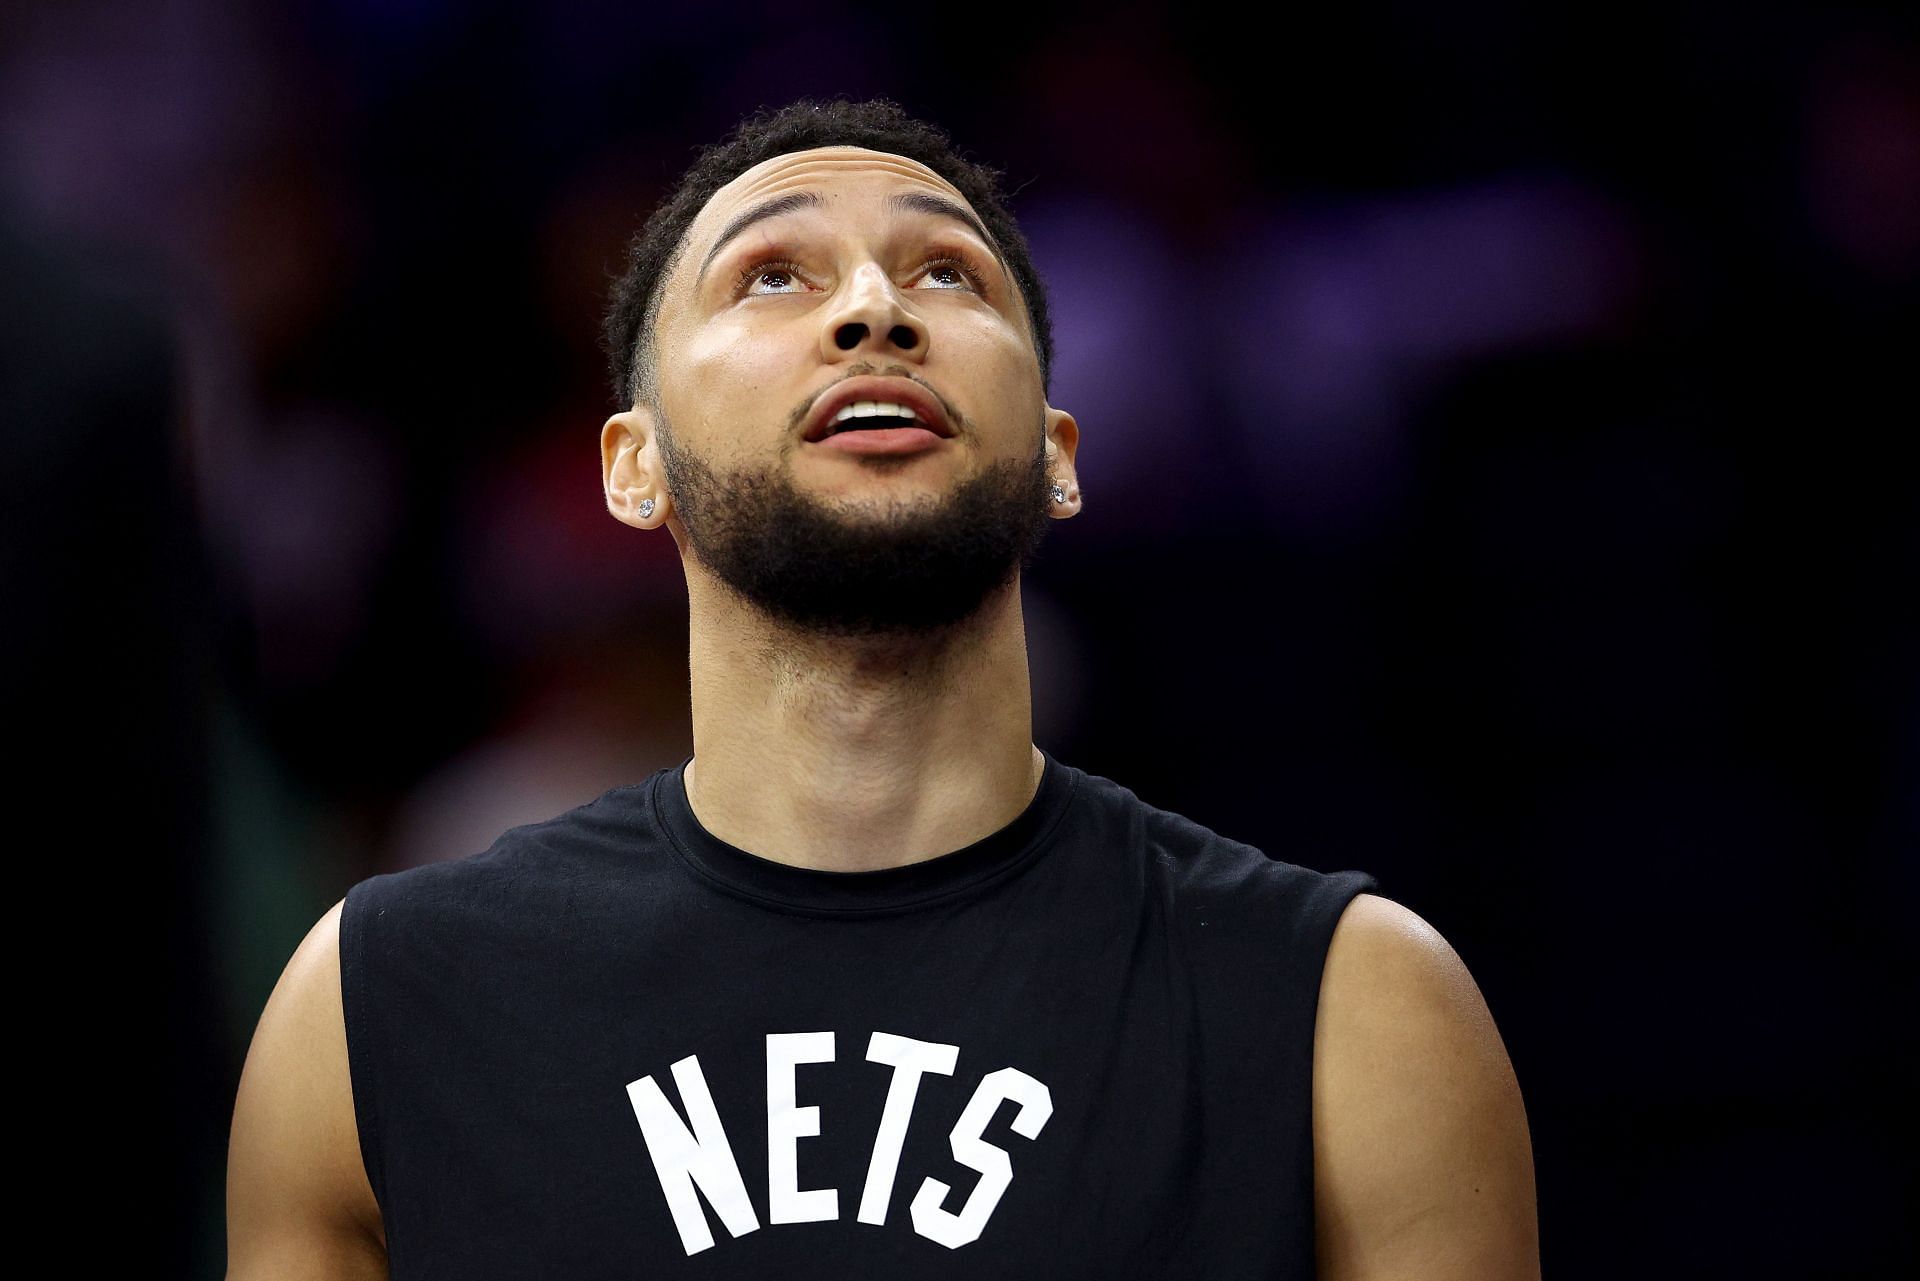 Ben Simmons of the Brooklyn Nets.